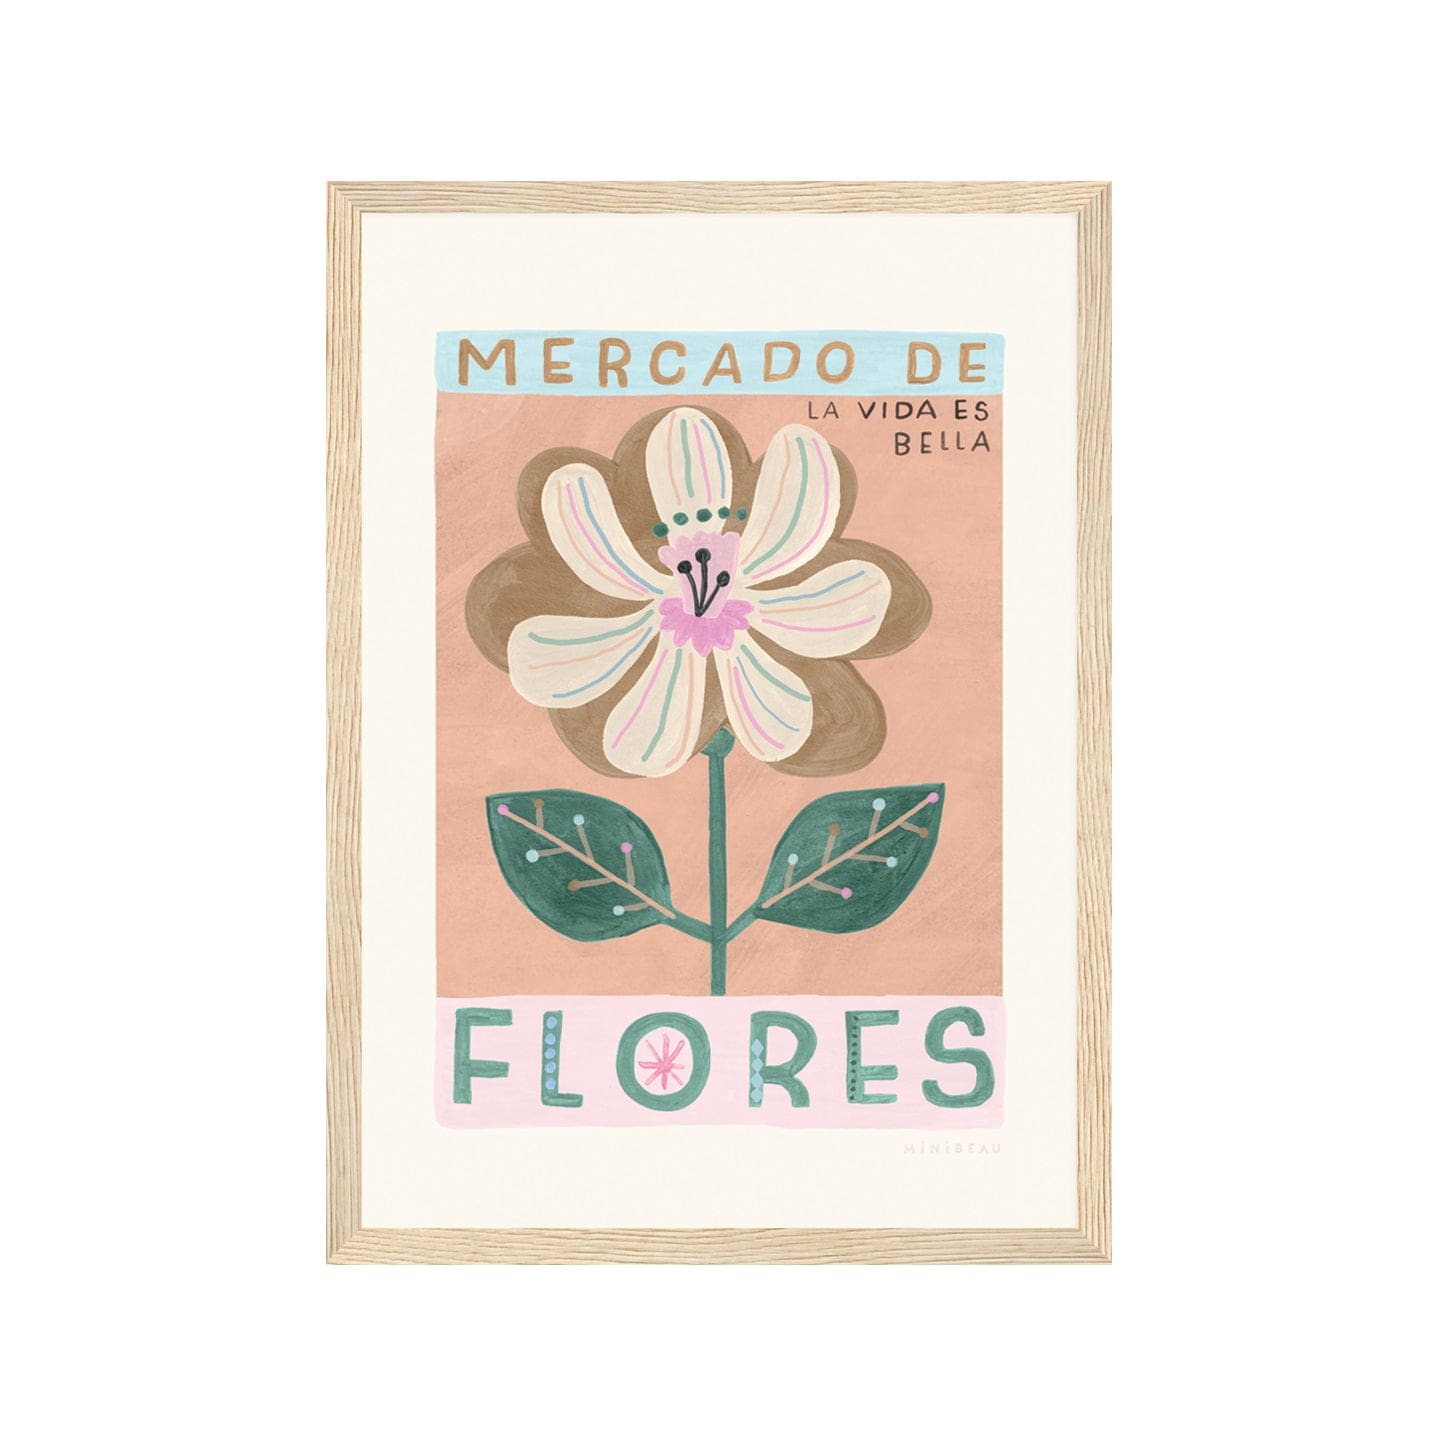 Art print in lilght wood frame. Our Mercado de Flores art print drawn in a vintage style features alarge cream flower with pink and blue veins and 2 leaves on the stem on a pink background. With MERCADO DE on a blue background, and  FLORES on a cream background, in large font and LA VIDA ES BELLA in small text on a terracotta and cream background.